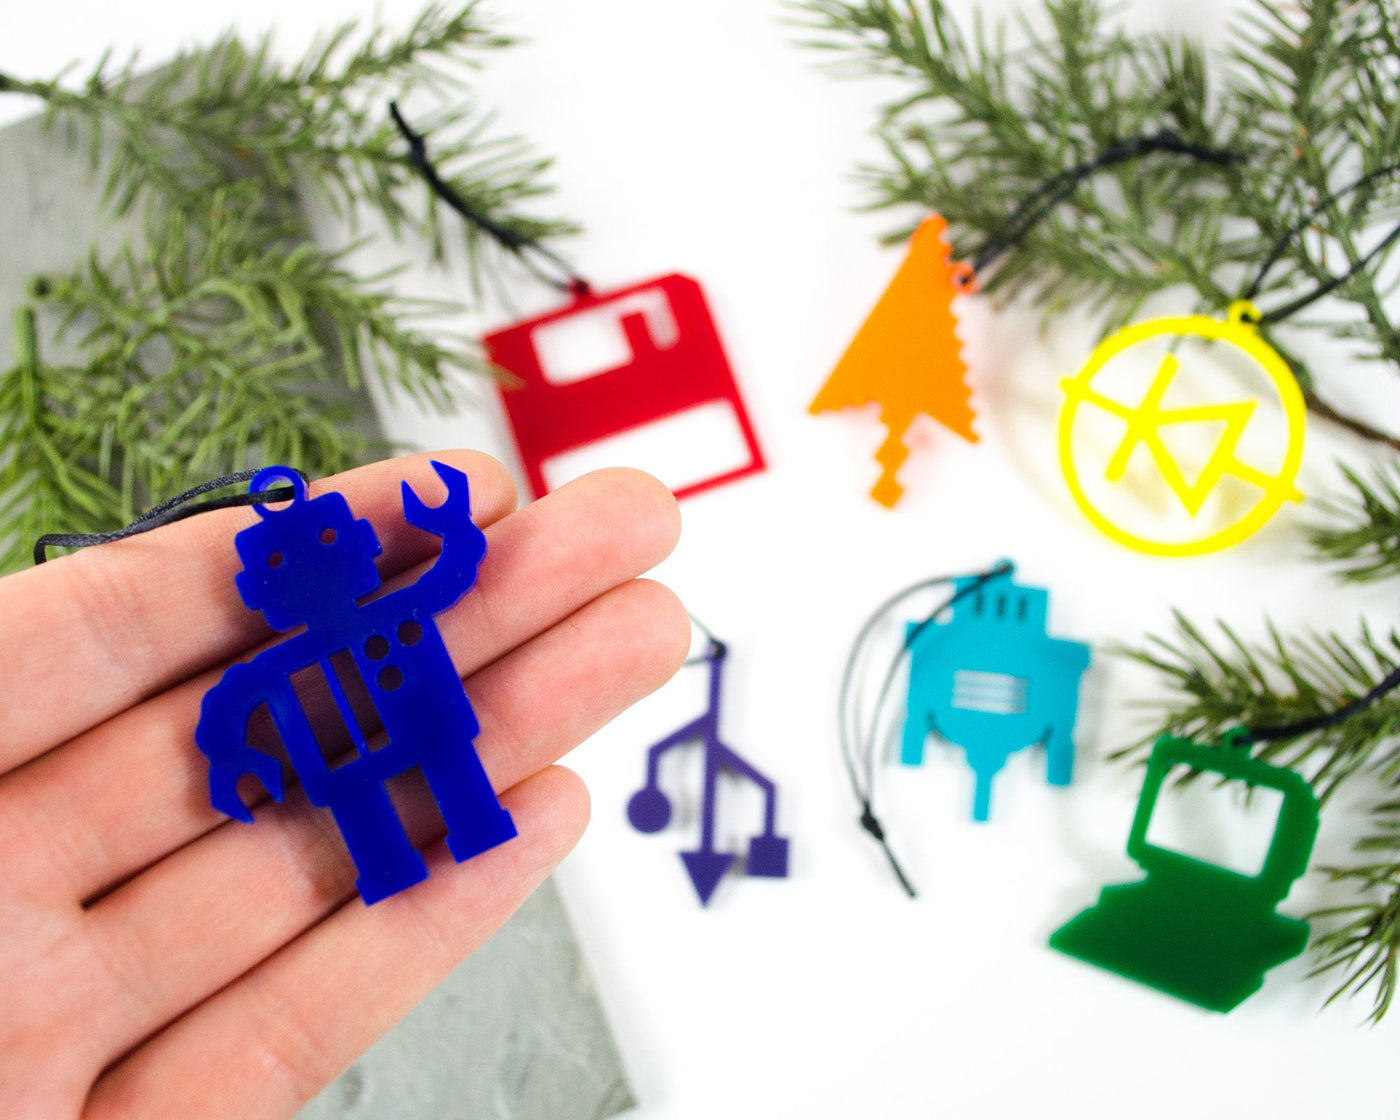 Computer Science - Set of 7 Ornaments